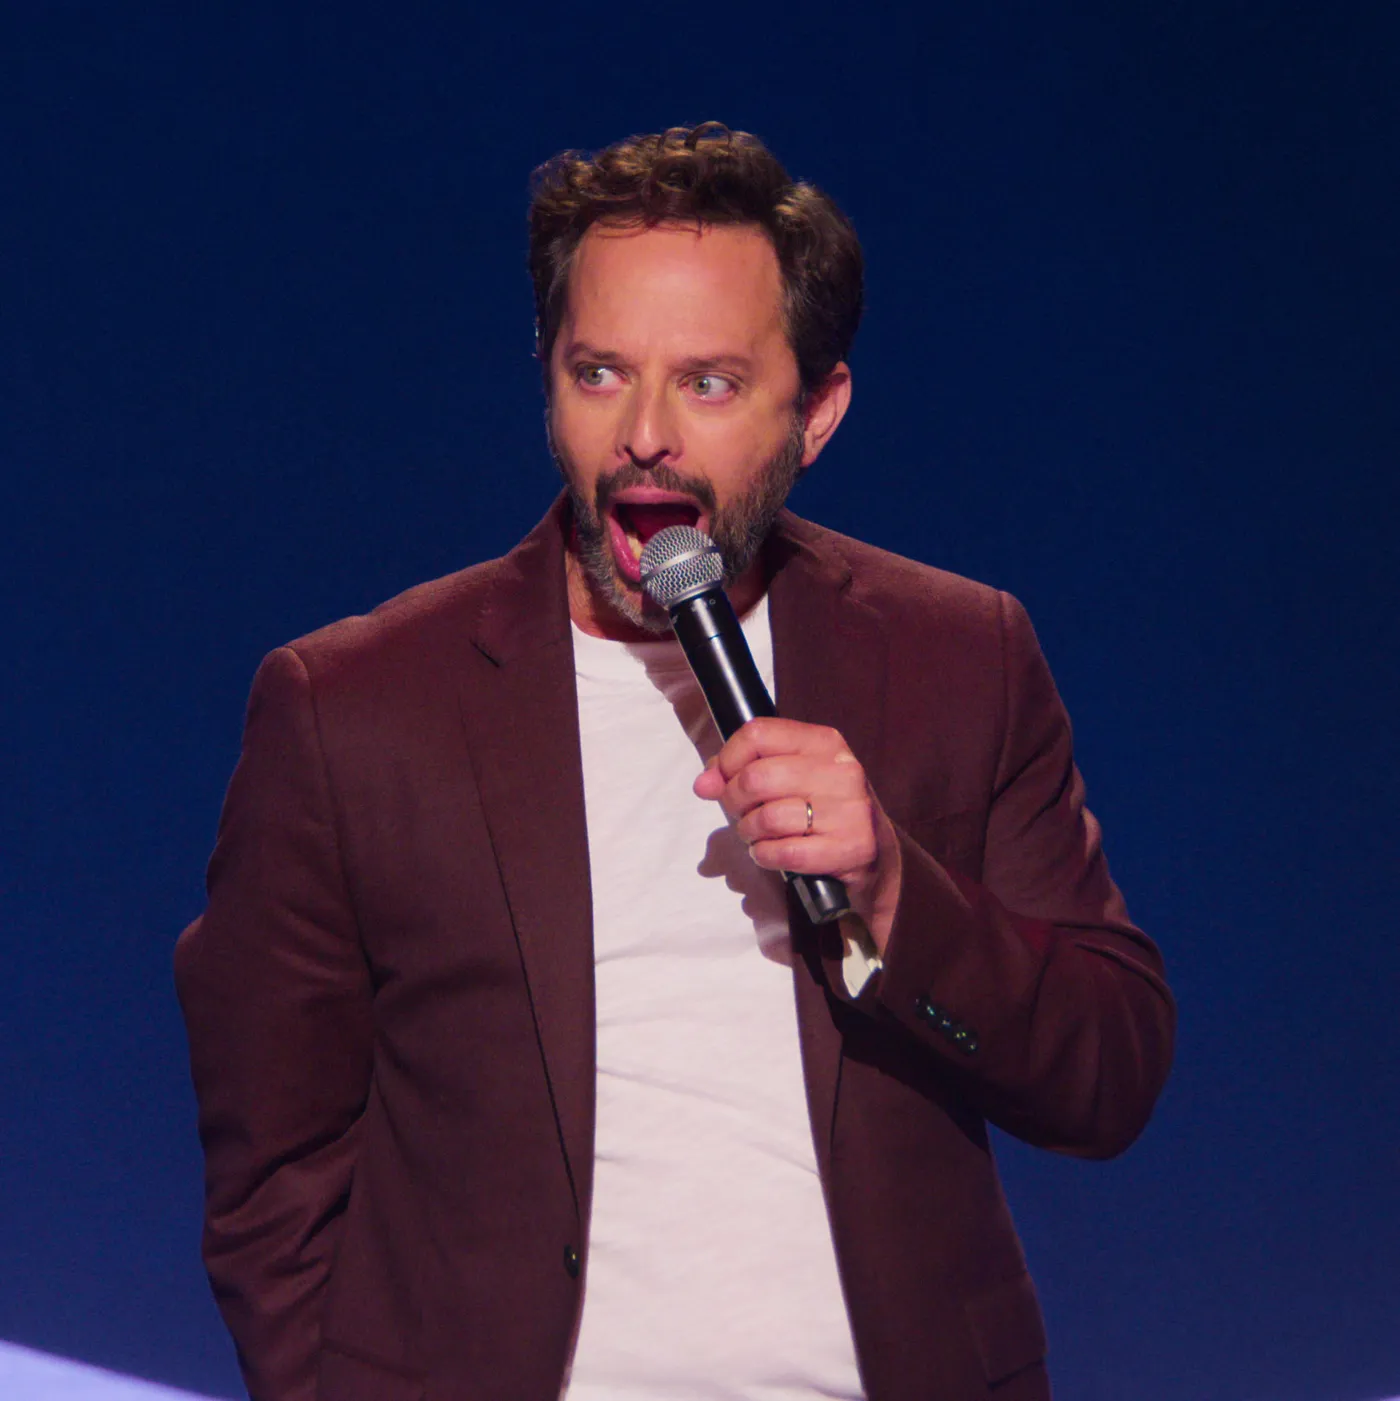 Nick Kroll doing a stand-up comedy performance